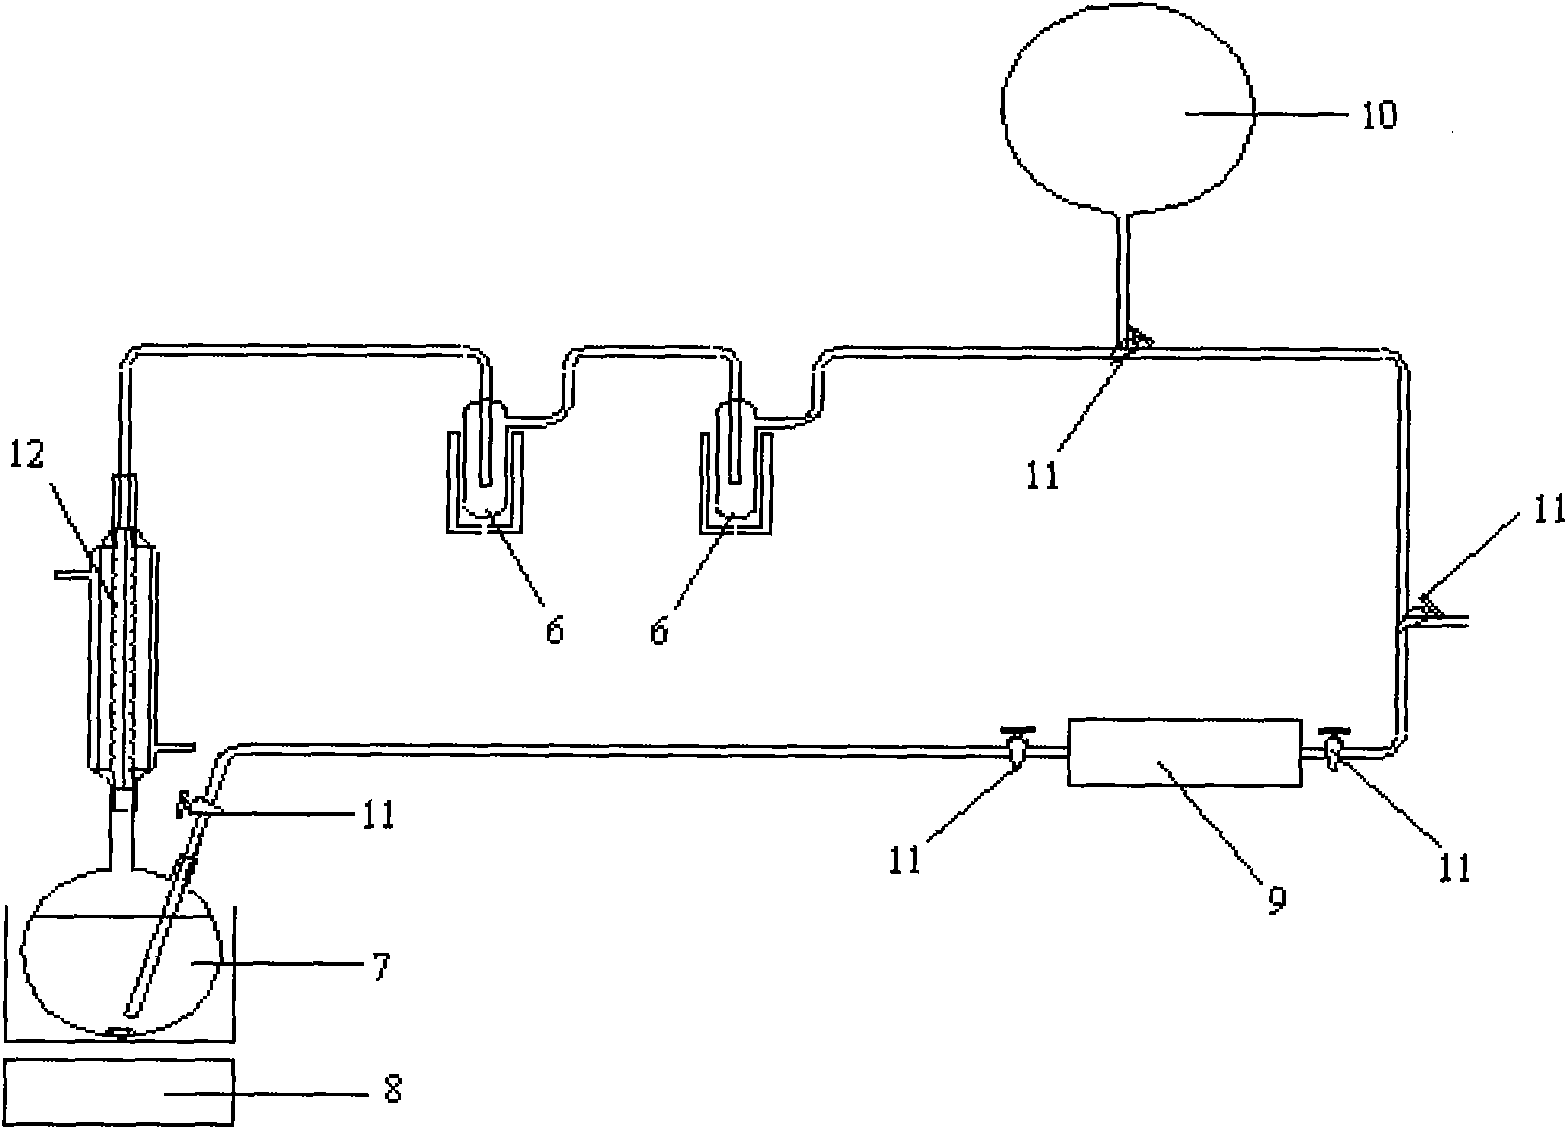 Preparation method of isotope 13C-marked aldehyde